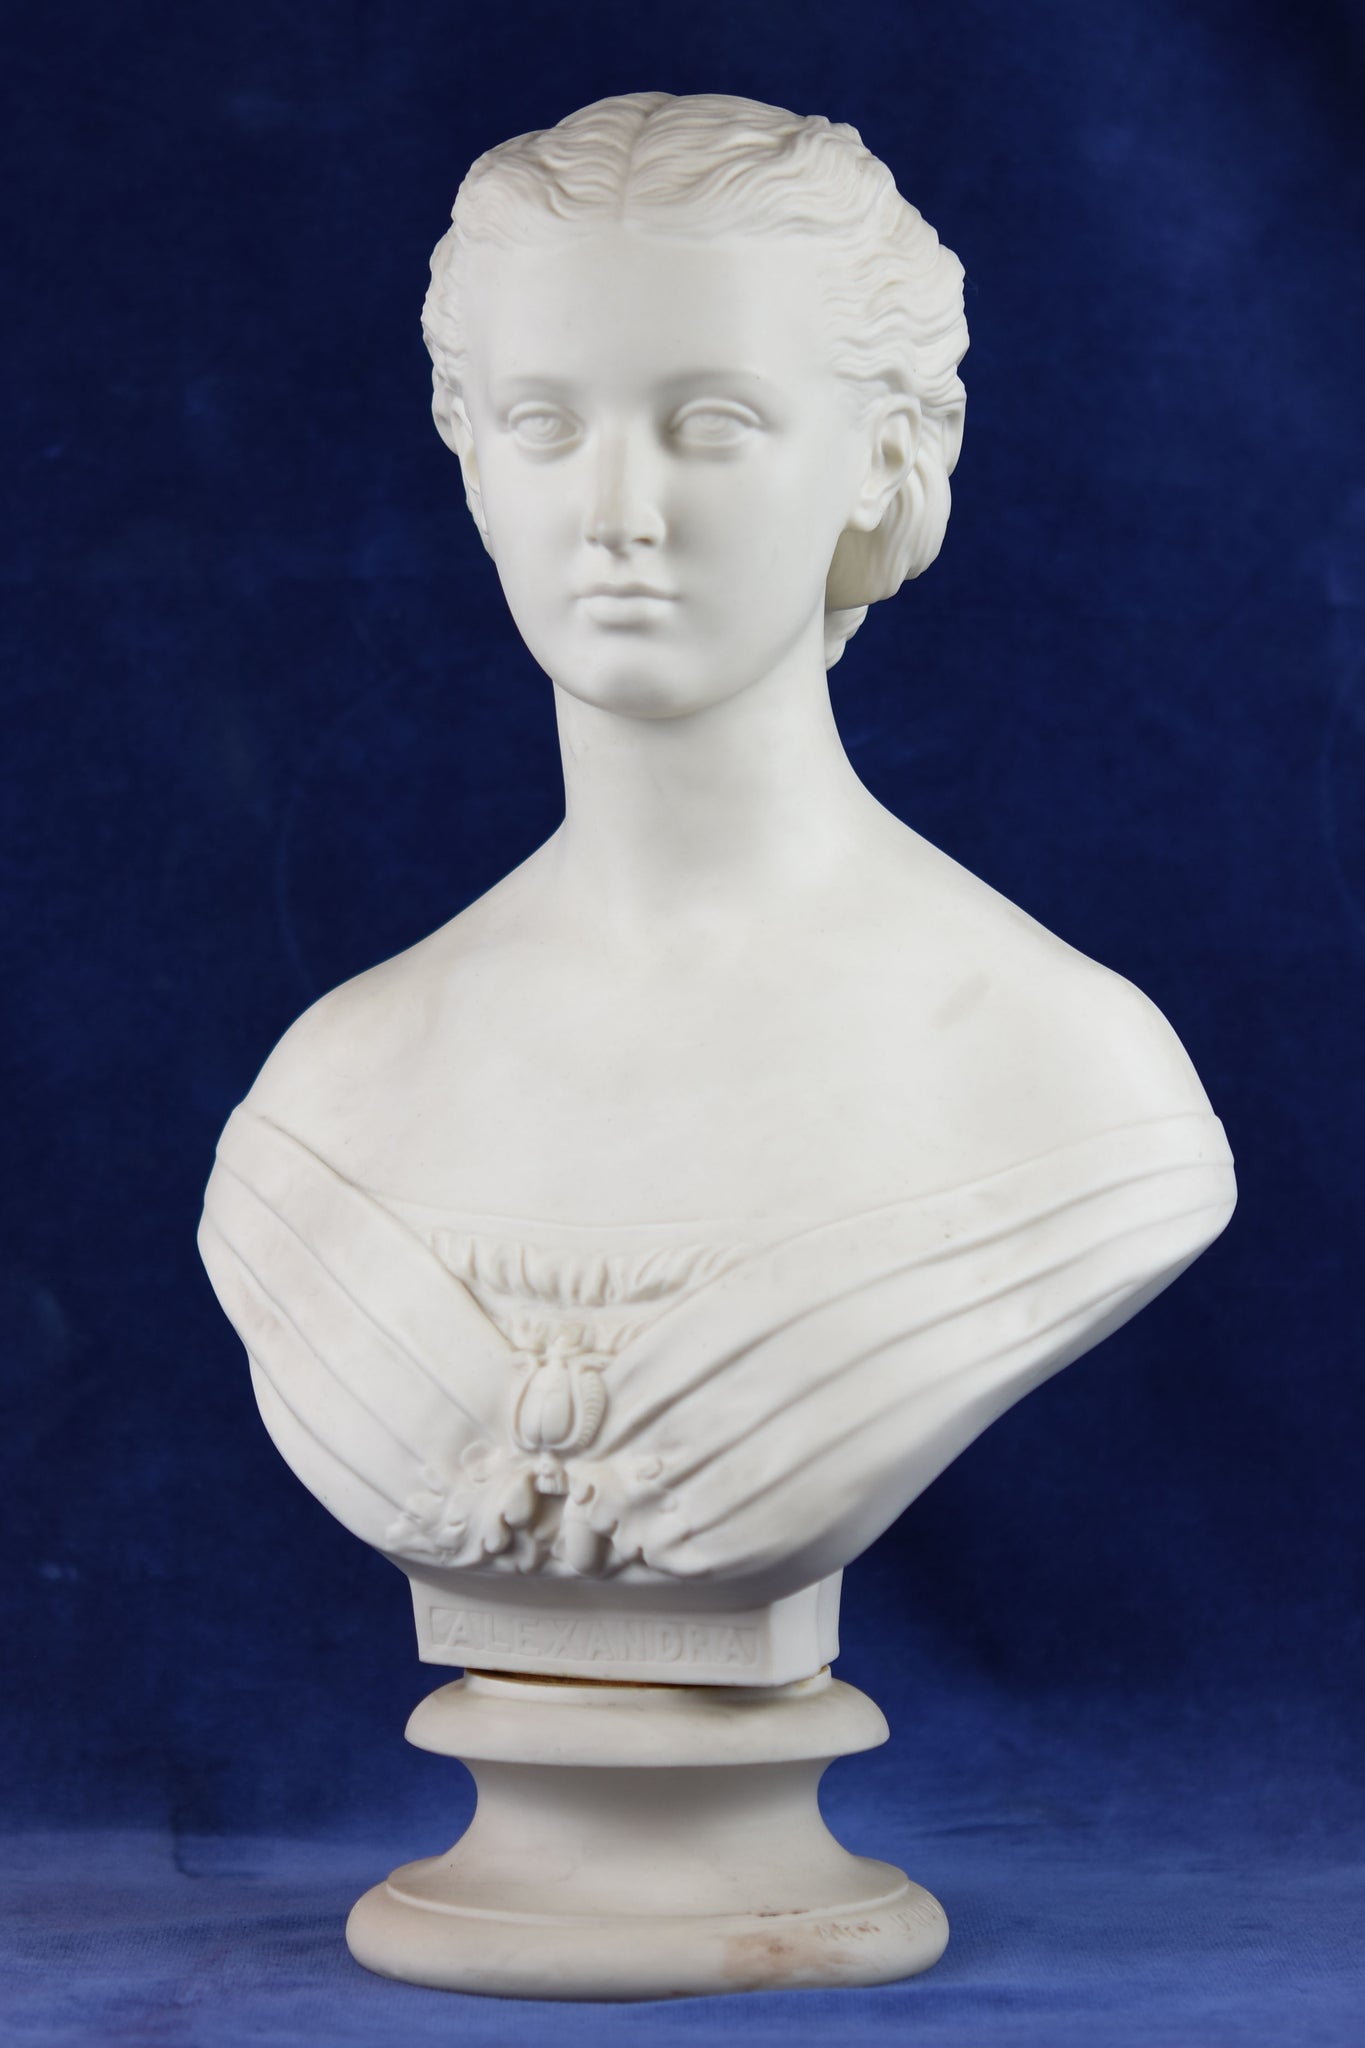 Copeland Parian Ware Bust 'Princess Alexandra' Sculpted by Mary Thornycroft 1883 for the Art Union of London